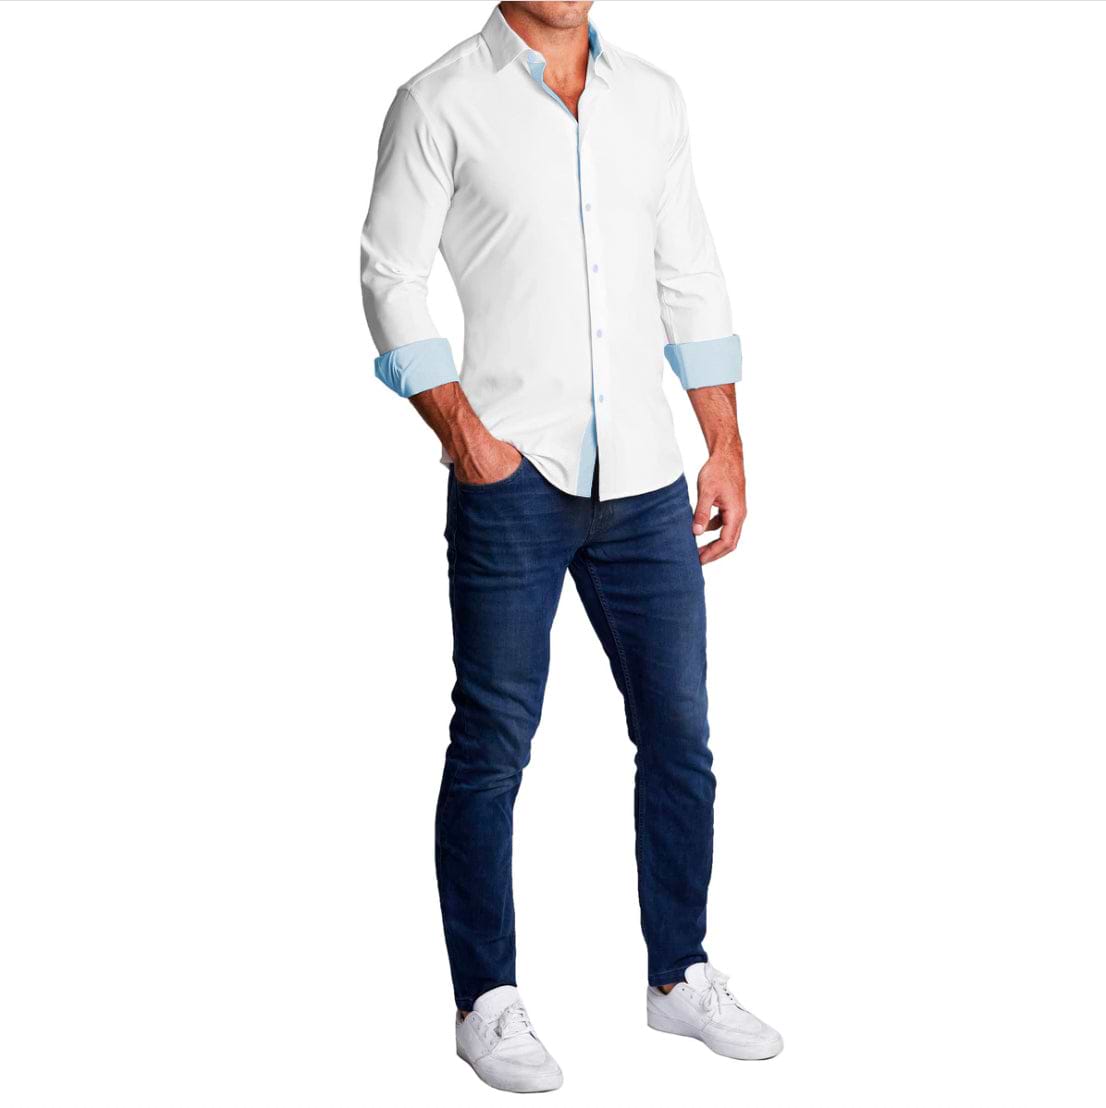 "The Briggs" Solid White with Light Blue Accents - Classic Fit